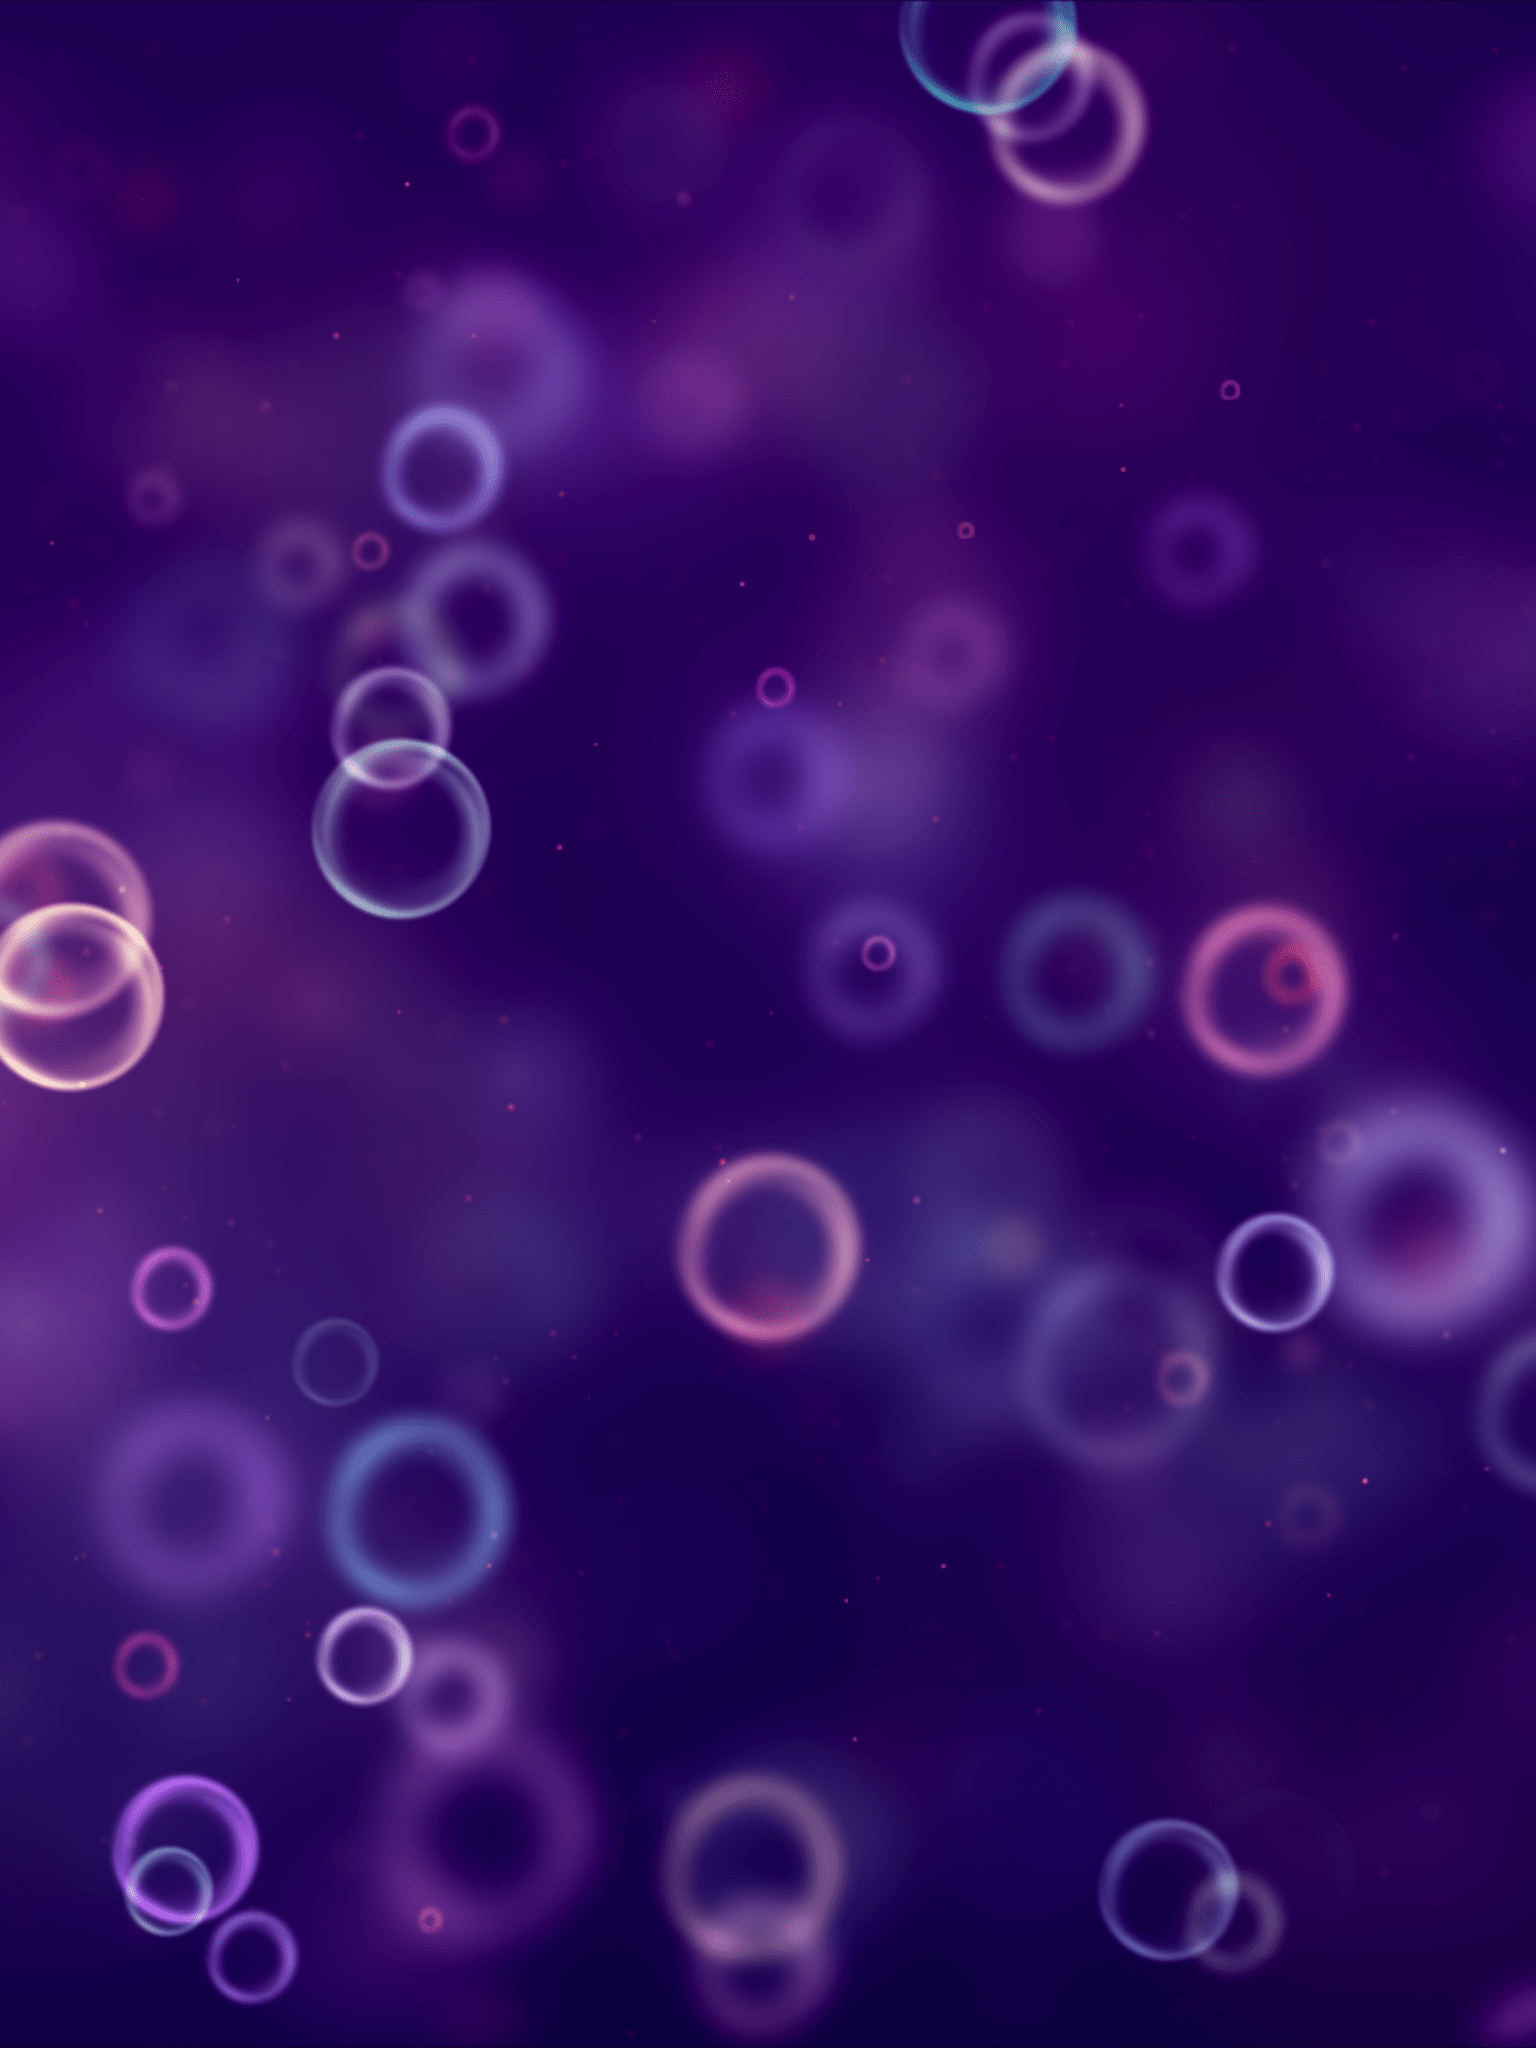 A purple image with many floating spheres of varying sizes - Bubbles